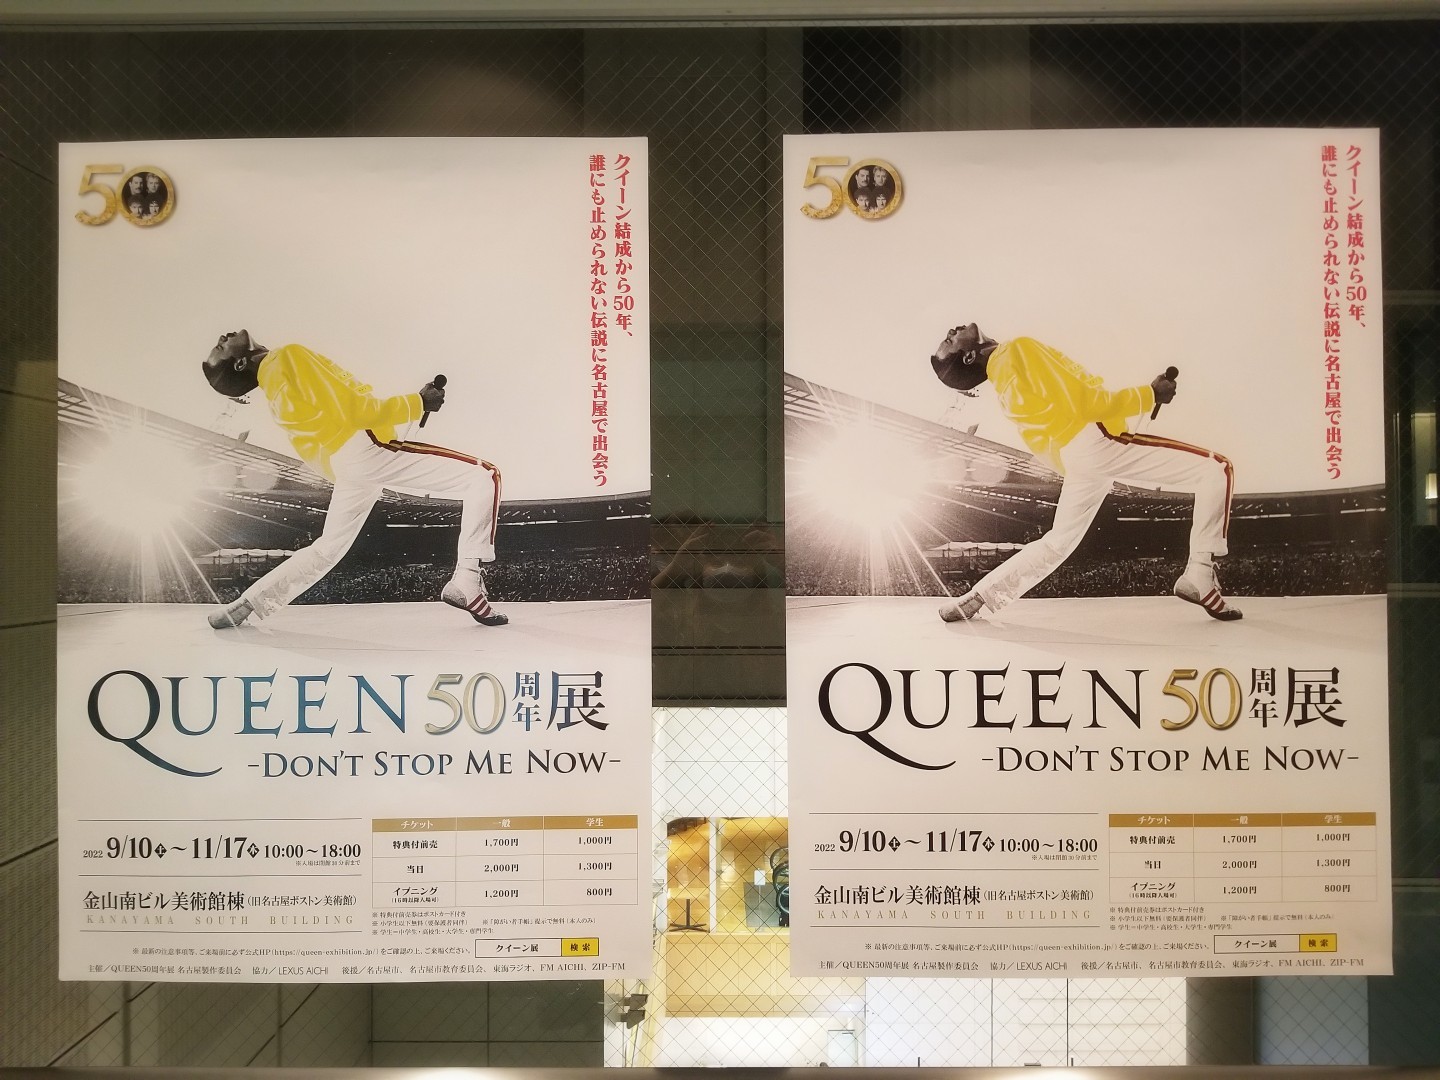 QUEEN50周年展 DON'T STOP ME NOW2　一般イブニングチケット(16時以降)1200